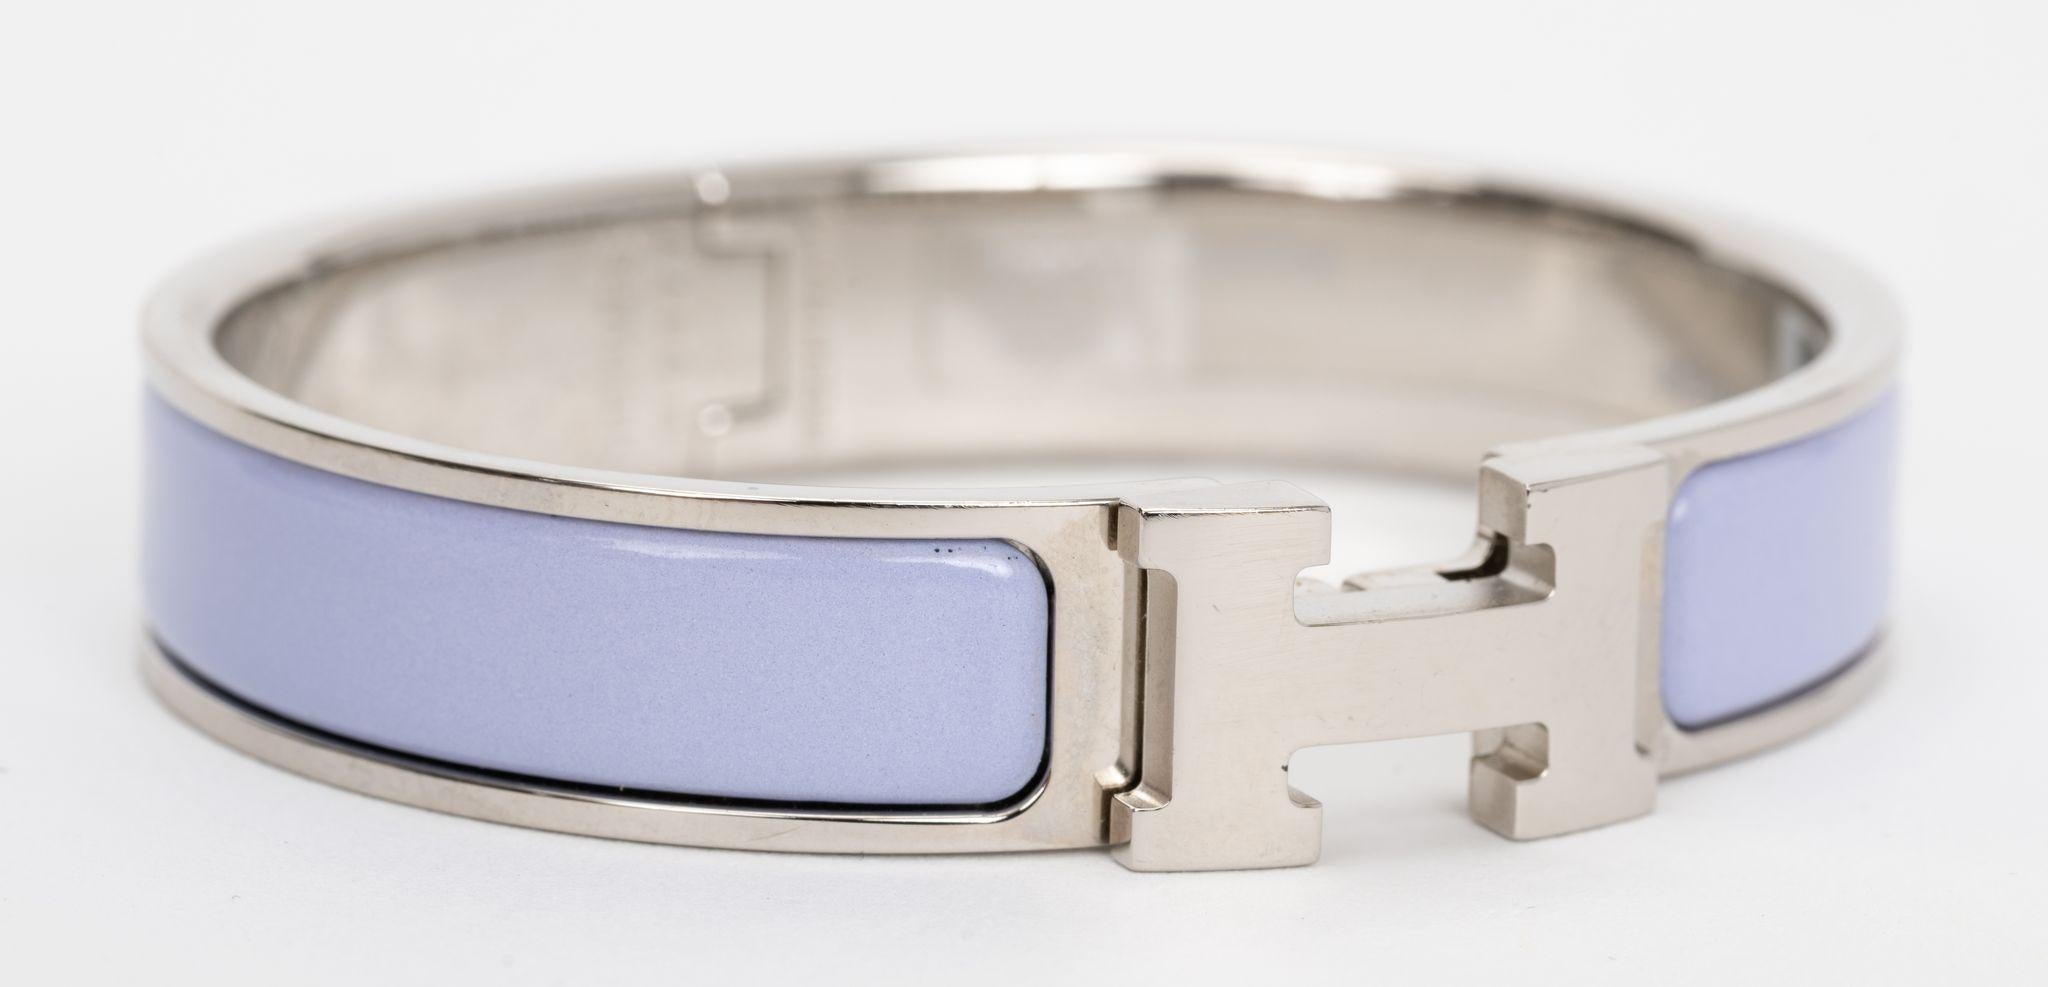 Hermès Clic Clac H, narrow bracelet , in lilac enamel with palladium-plated hardware.
Size PM , new in unworn condition, comes with velvet pouch.